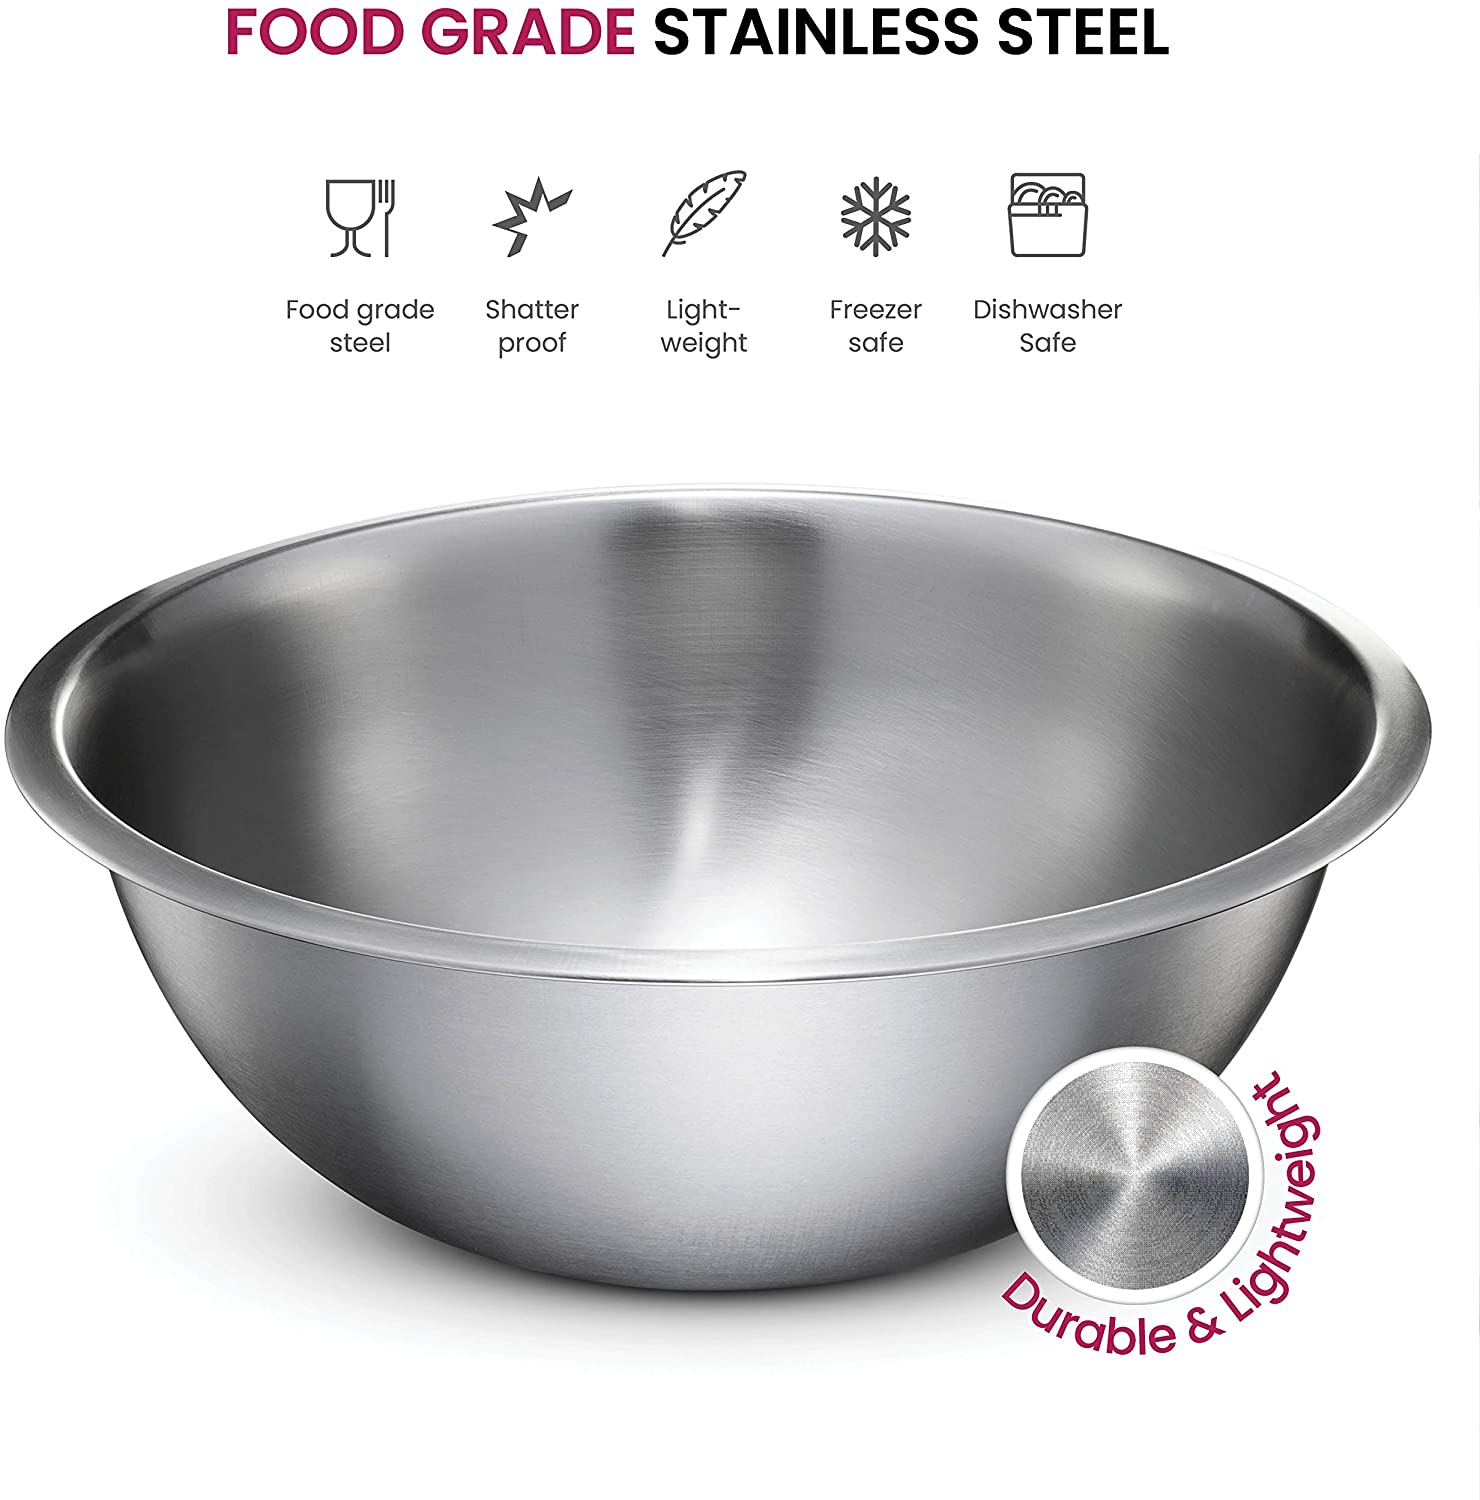 FineDine Stainless Steel Mixing Bowls (Set of 6) Polished Mirror Finish Nesting Bowls, ¾ - 1.5 - 3 - 4 - 5 - 8 Quart - Cooking Supplies - image 4 of 11